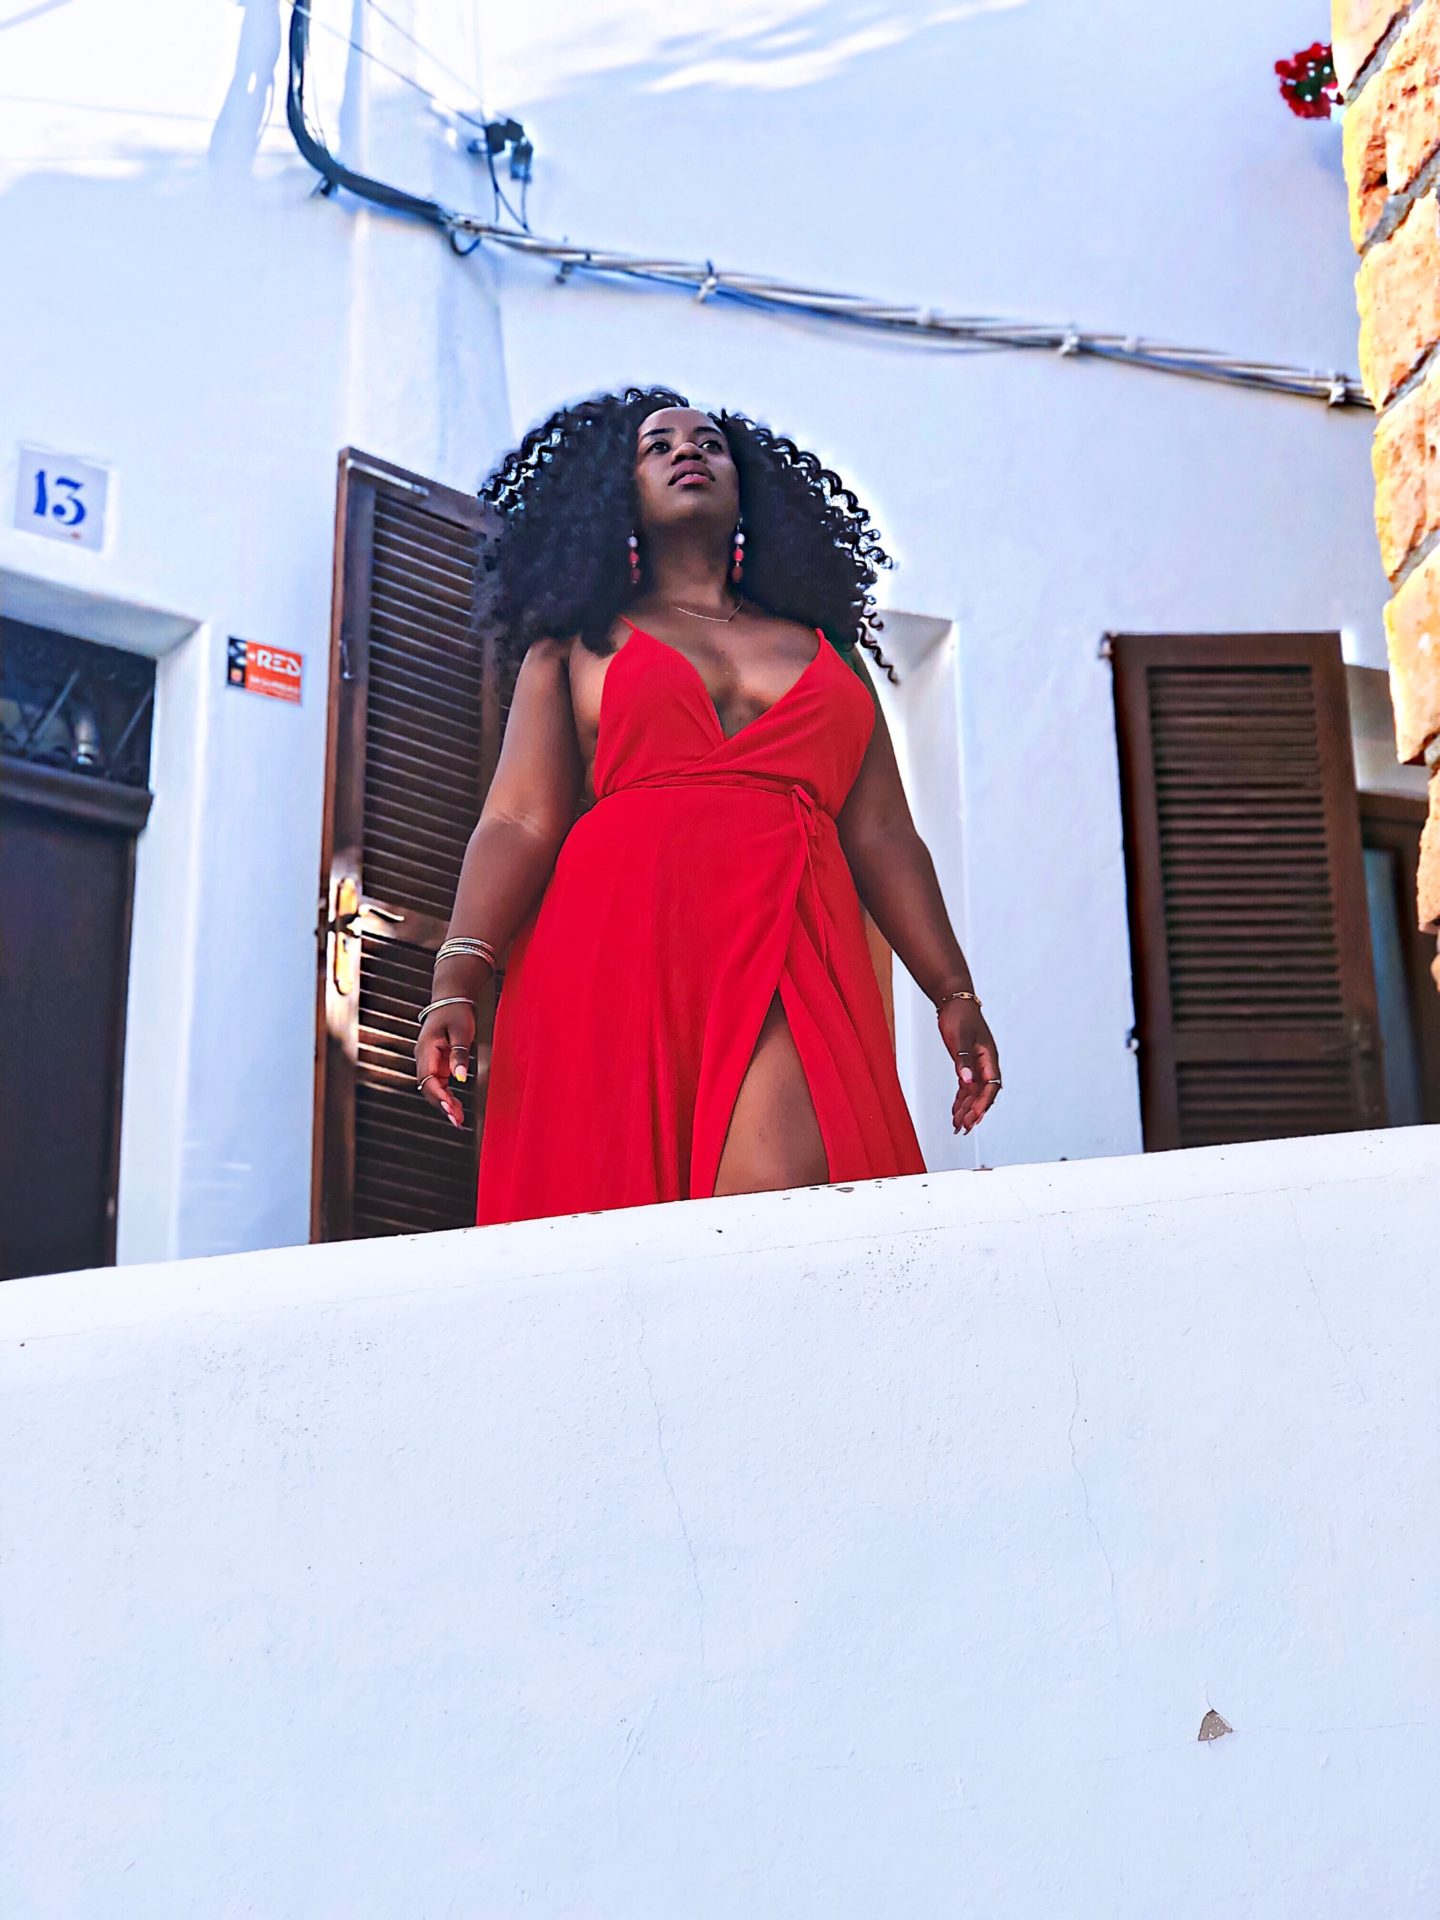 African, African Blogger, Boston Blogger, Spain, Ibiza, Africancocktail, African cocktail, Visa, Visa Requirements, Immigration, Fashionnova Curve